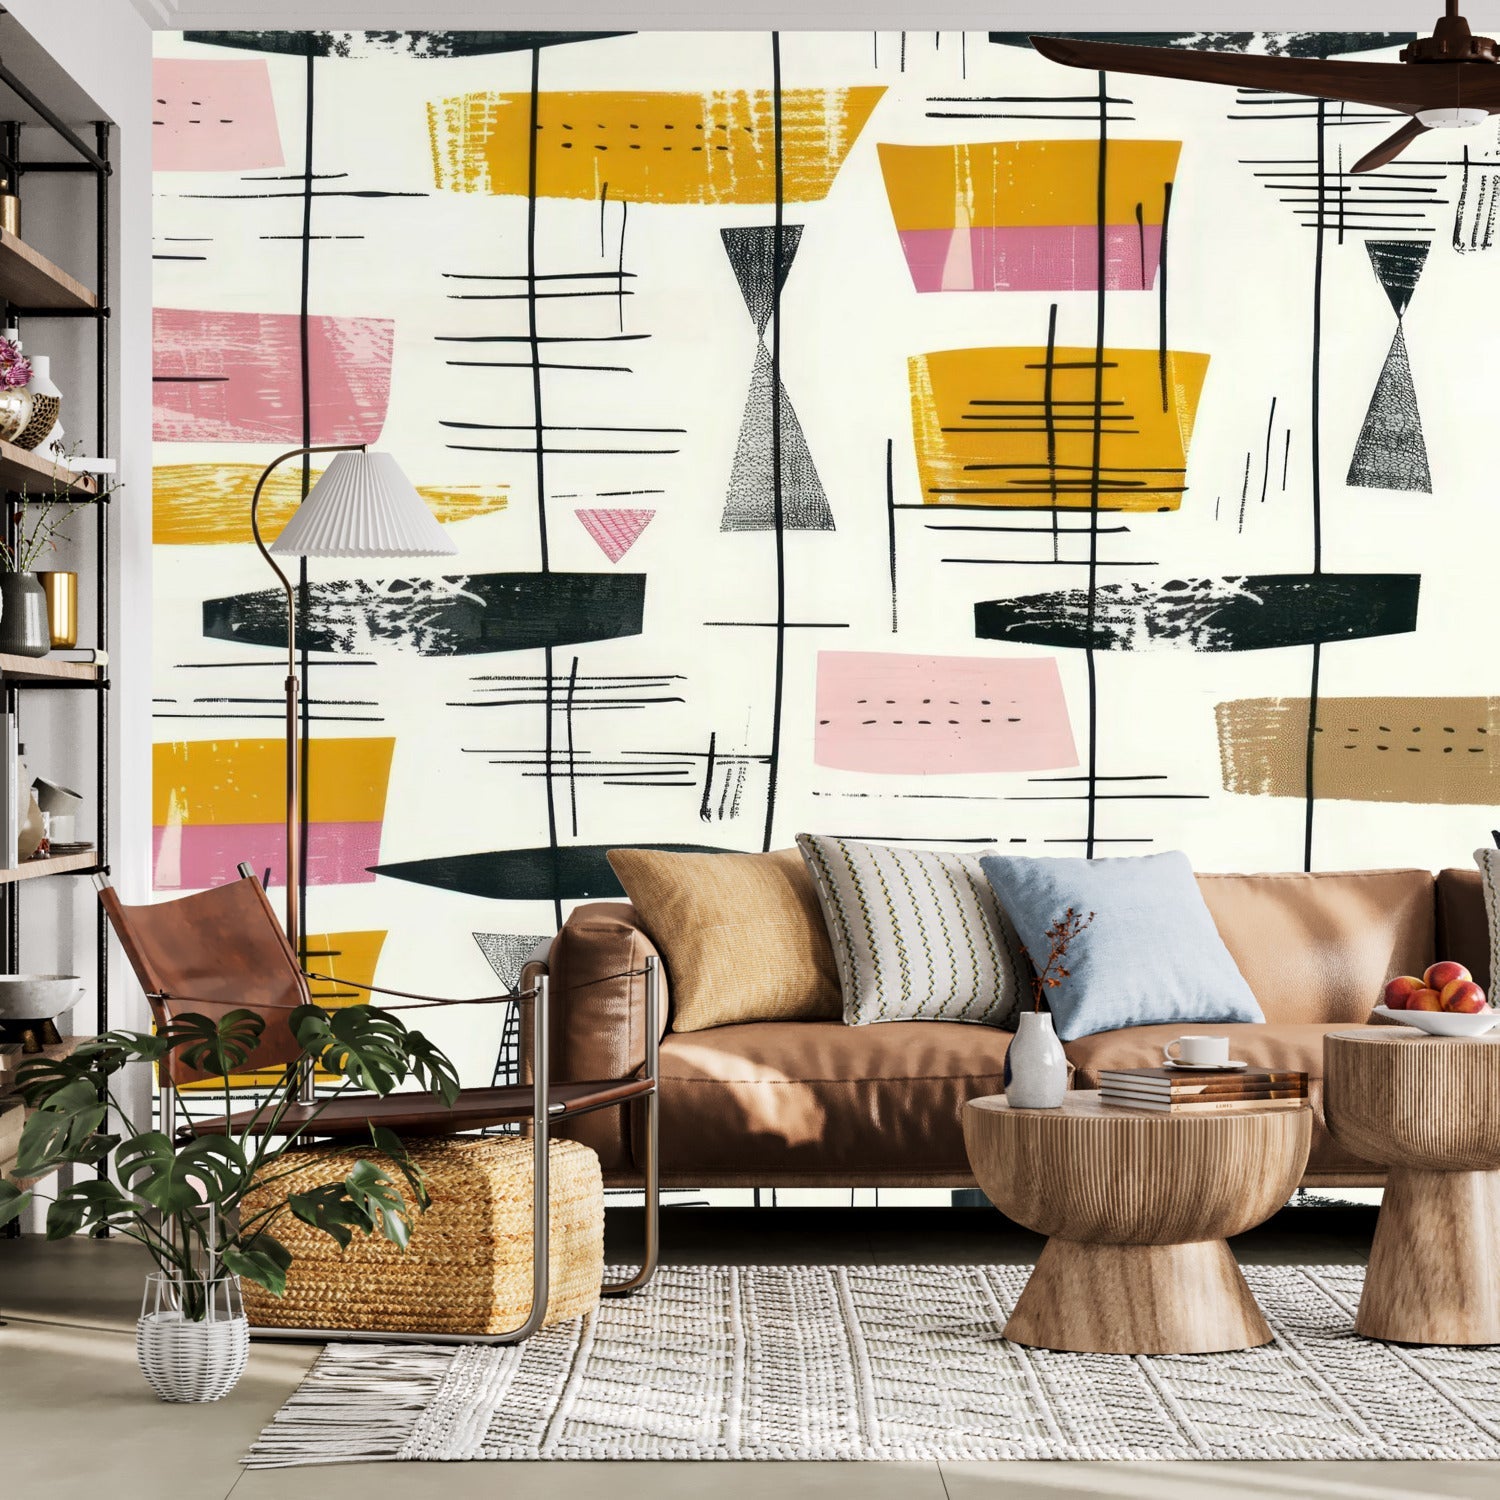 Kate McEnroe New York Retro Abstract Wall Mural, Mid Century Modern Peel And Stick Design, 1950s Style Home Decor, Geometric Mural Panels, Vintage Accent Wall ArtWall Mural118582